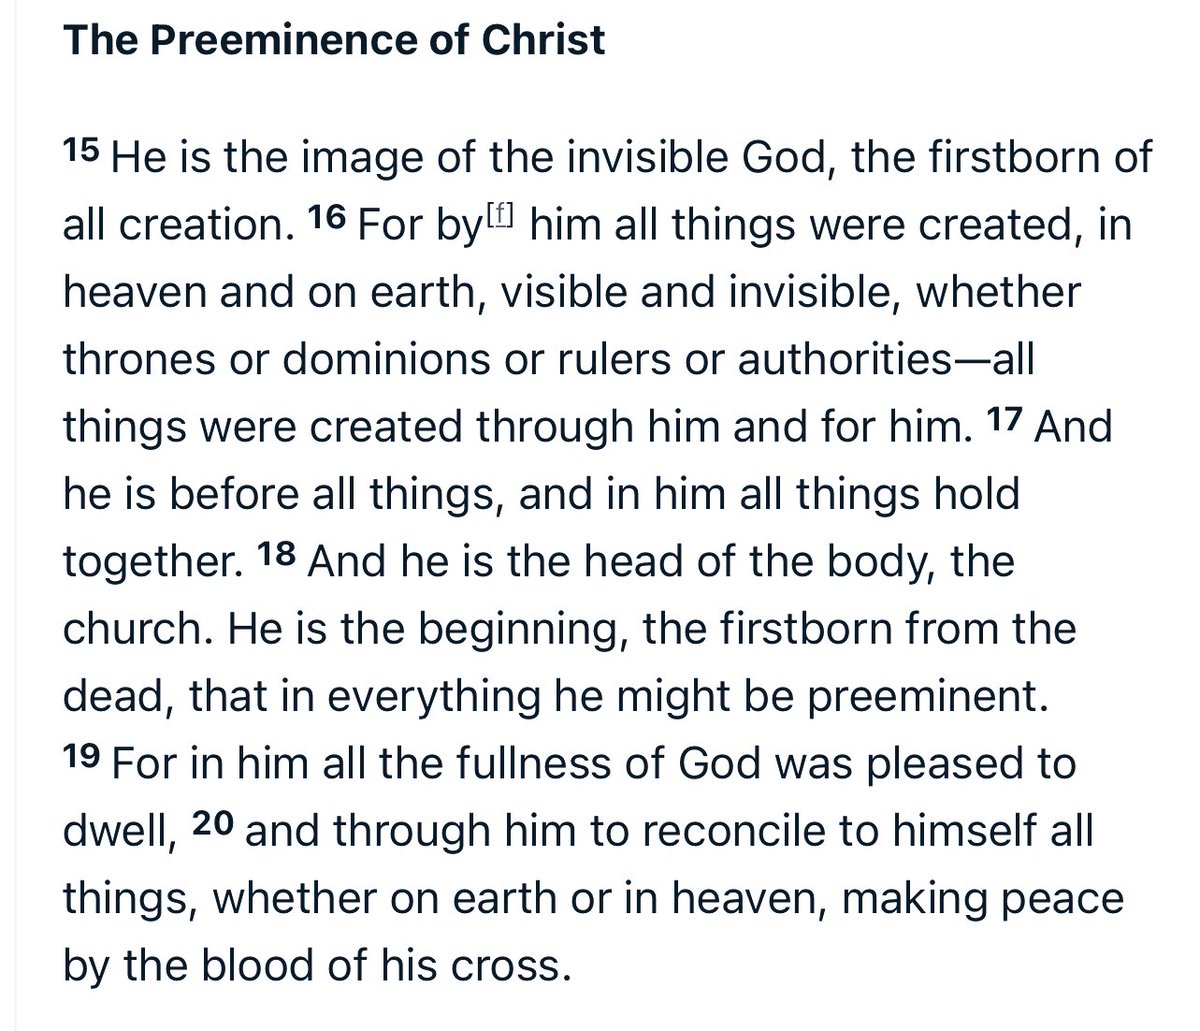 @RealCandaceO Colossians 1 
The Preeminence of Christ

15 He is the image of the invisible God, the firstborn of all creation. 

16 For by him all things were created, in heaven and on earth, visible and invisible, whether thrones or dominions or rulers or authorities—all things were created…